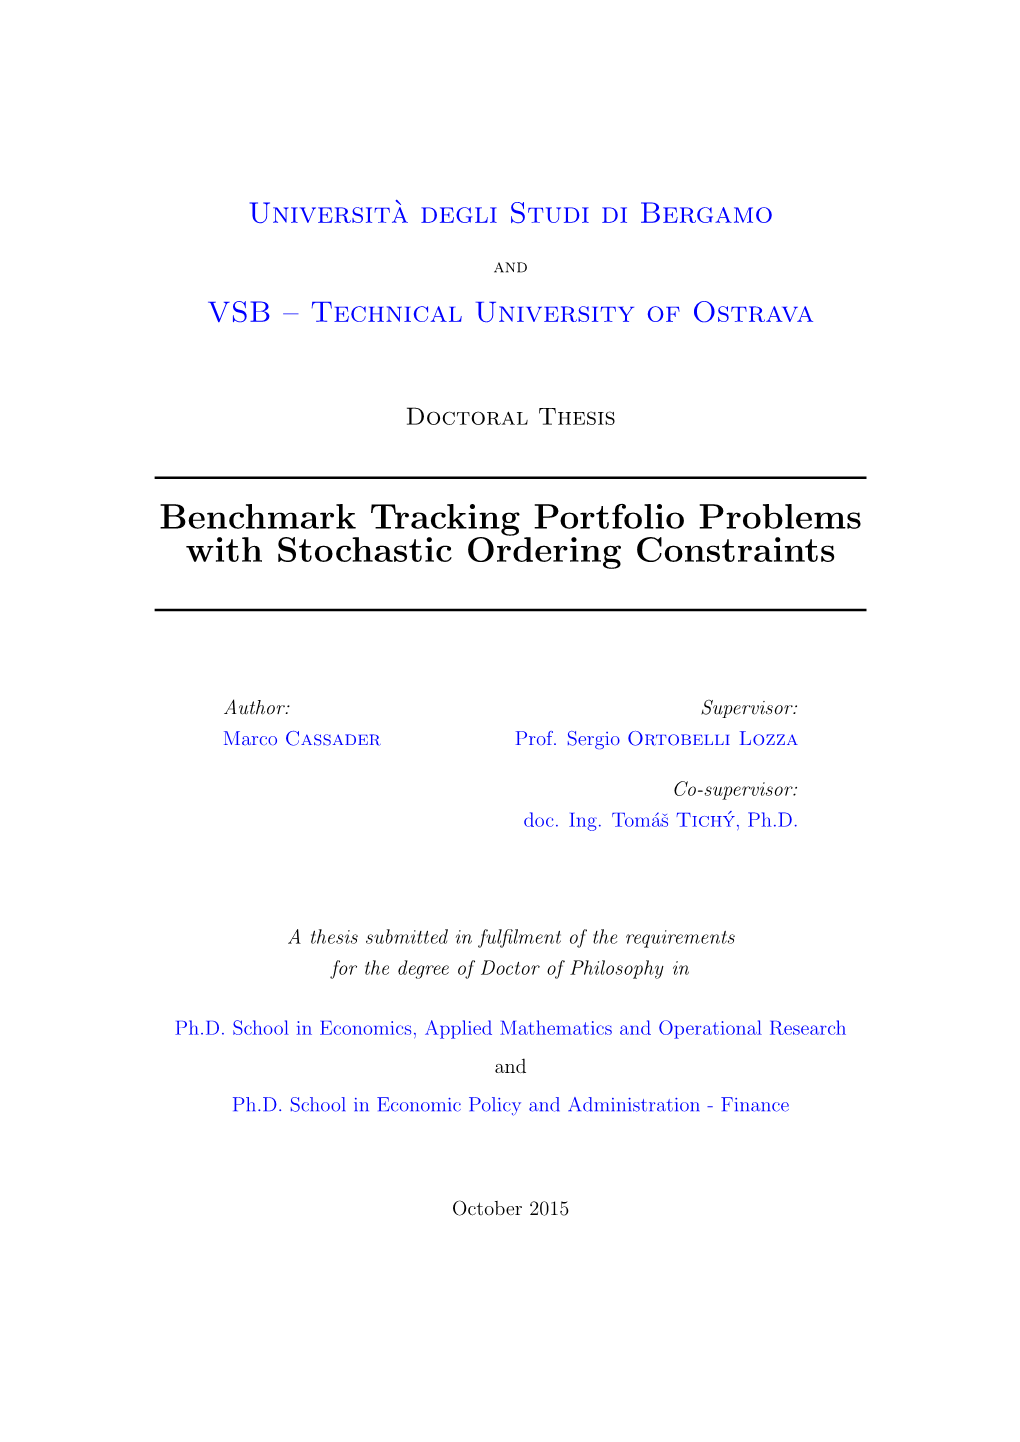 Benchmark Tracking Portfolio Problems with Stochastic Ordering Constraints